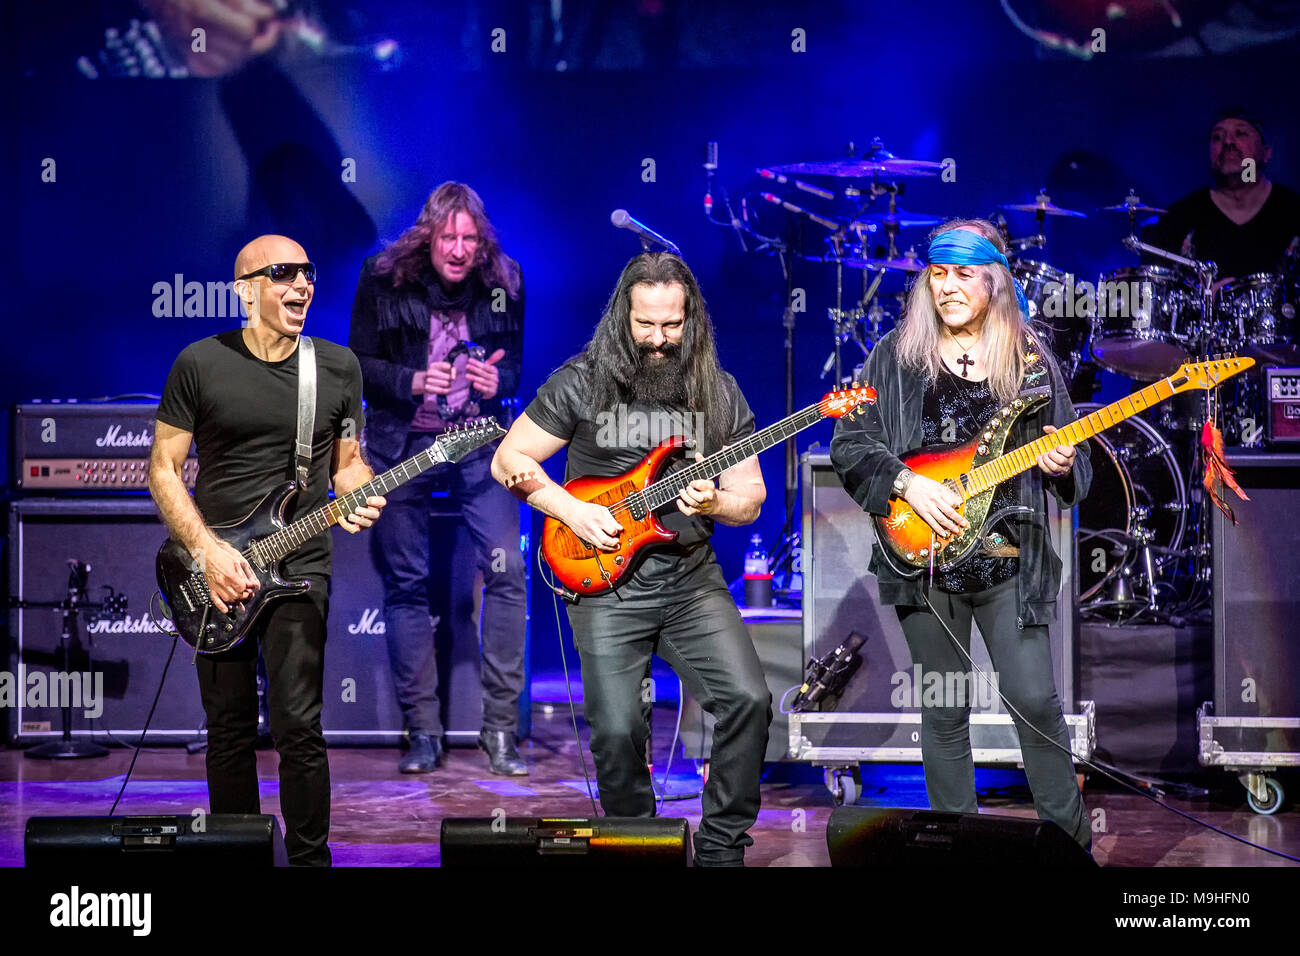 Norway, Oslo - March 24, 2018. The G3 guitar concert tour has reached Oslo  Konserthus. Here guitarists Joe Satriani (L), John Petrucci (C) and Uli Jon  Roth (R) are seen live on